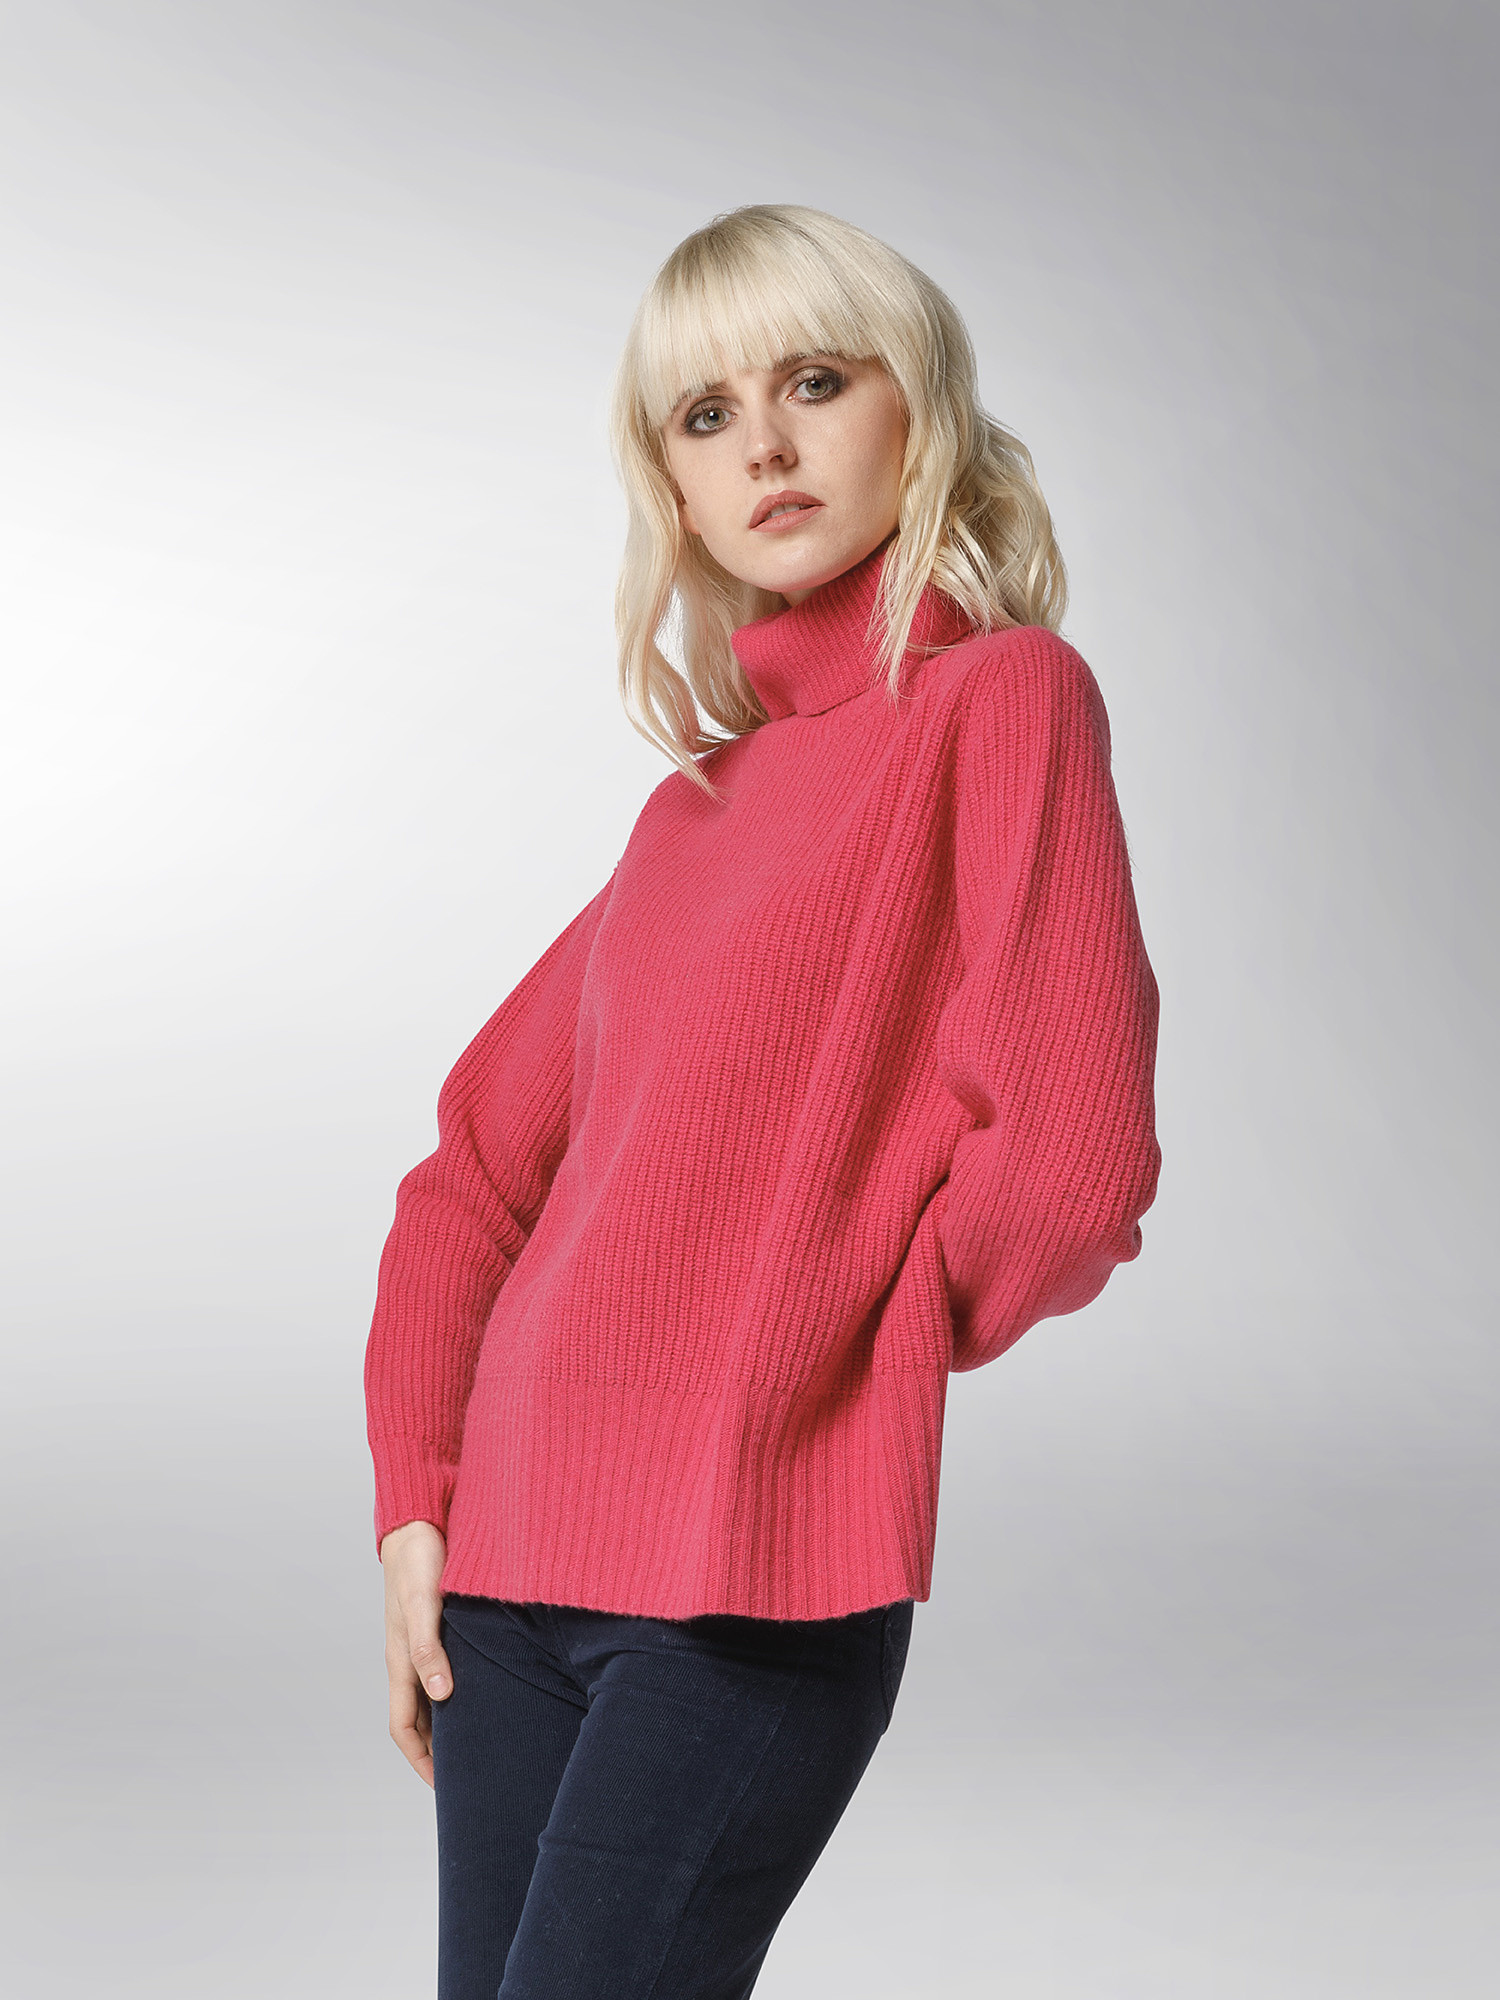 K Collection - Carded wool turtleneck pullover, Pink Fuchsia, large image number 3